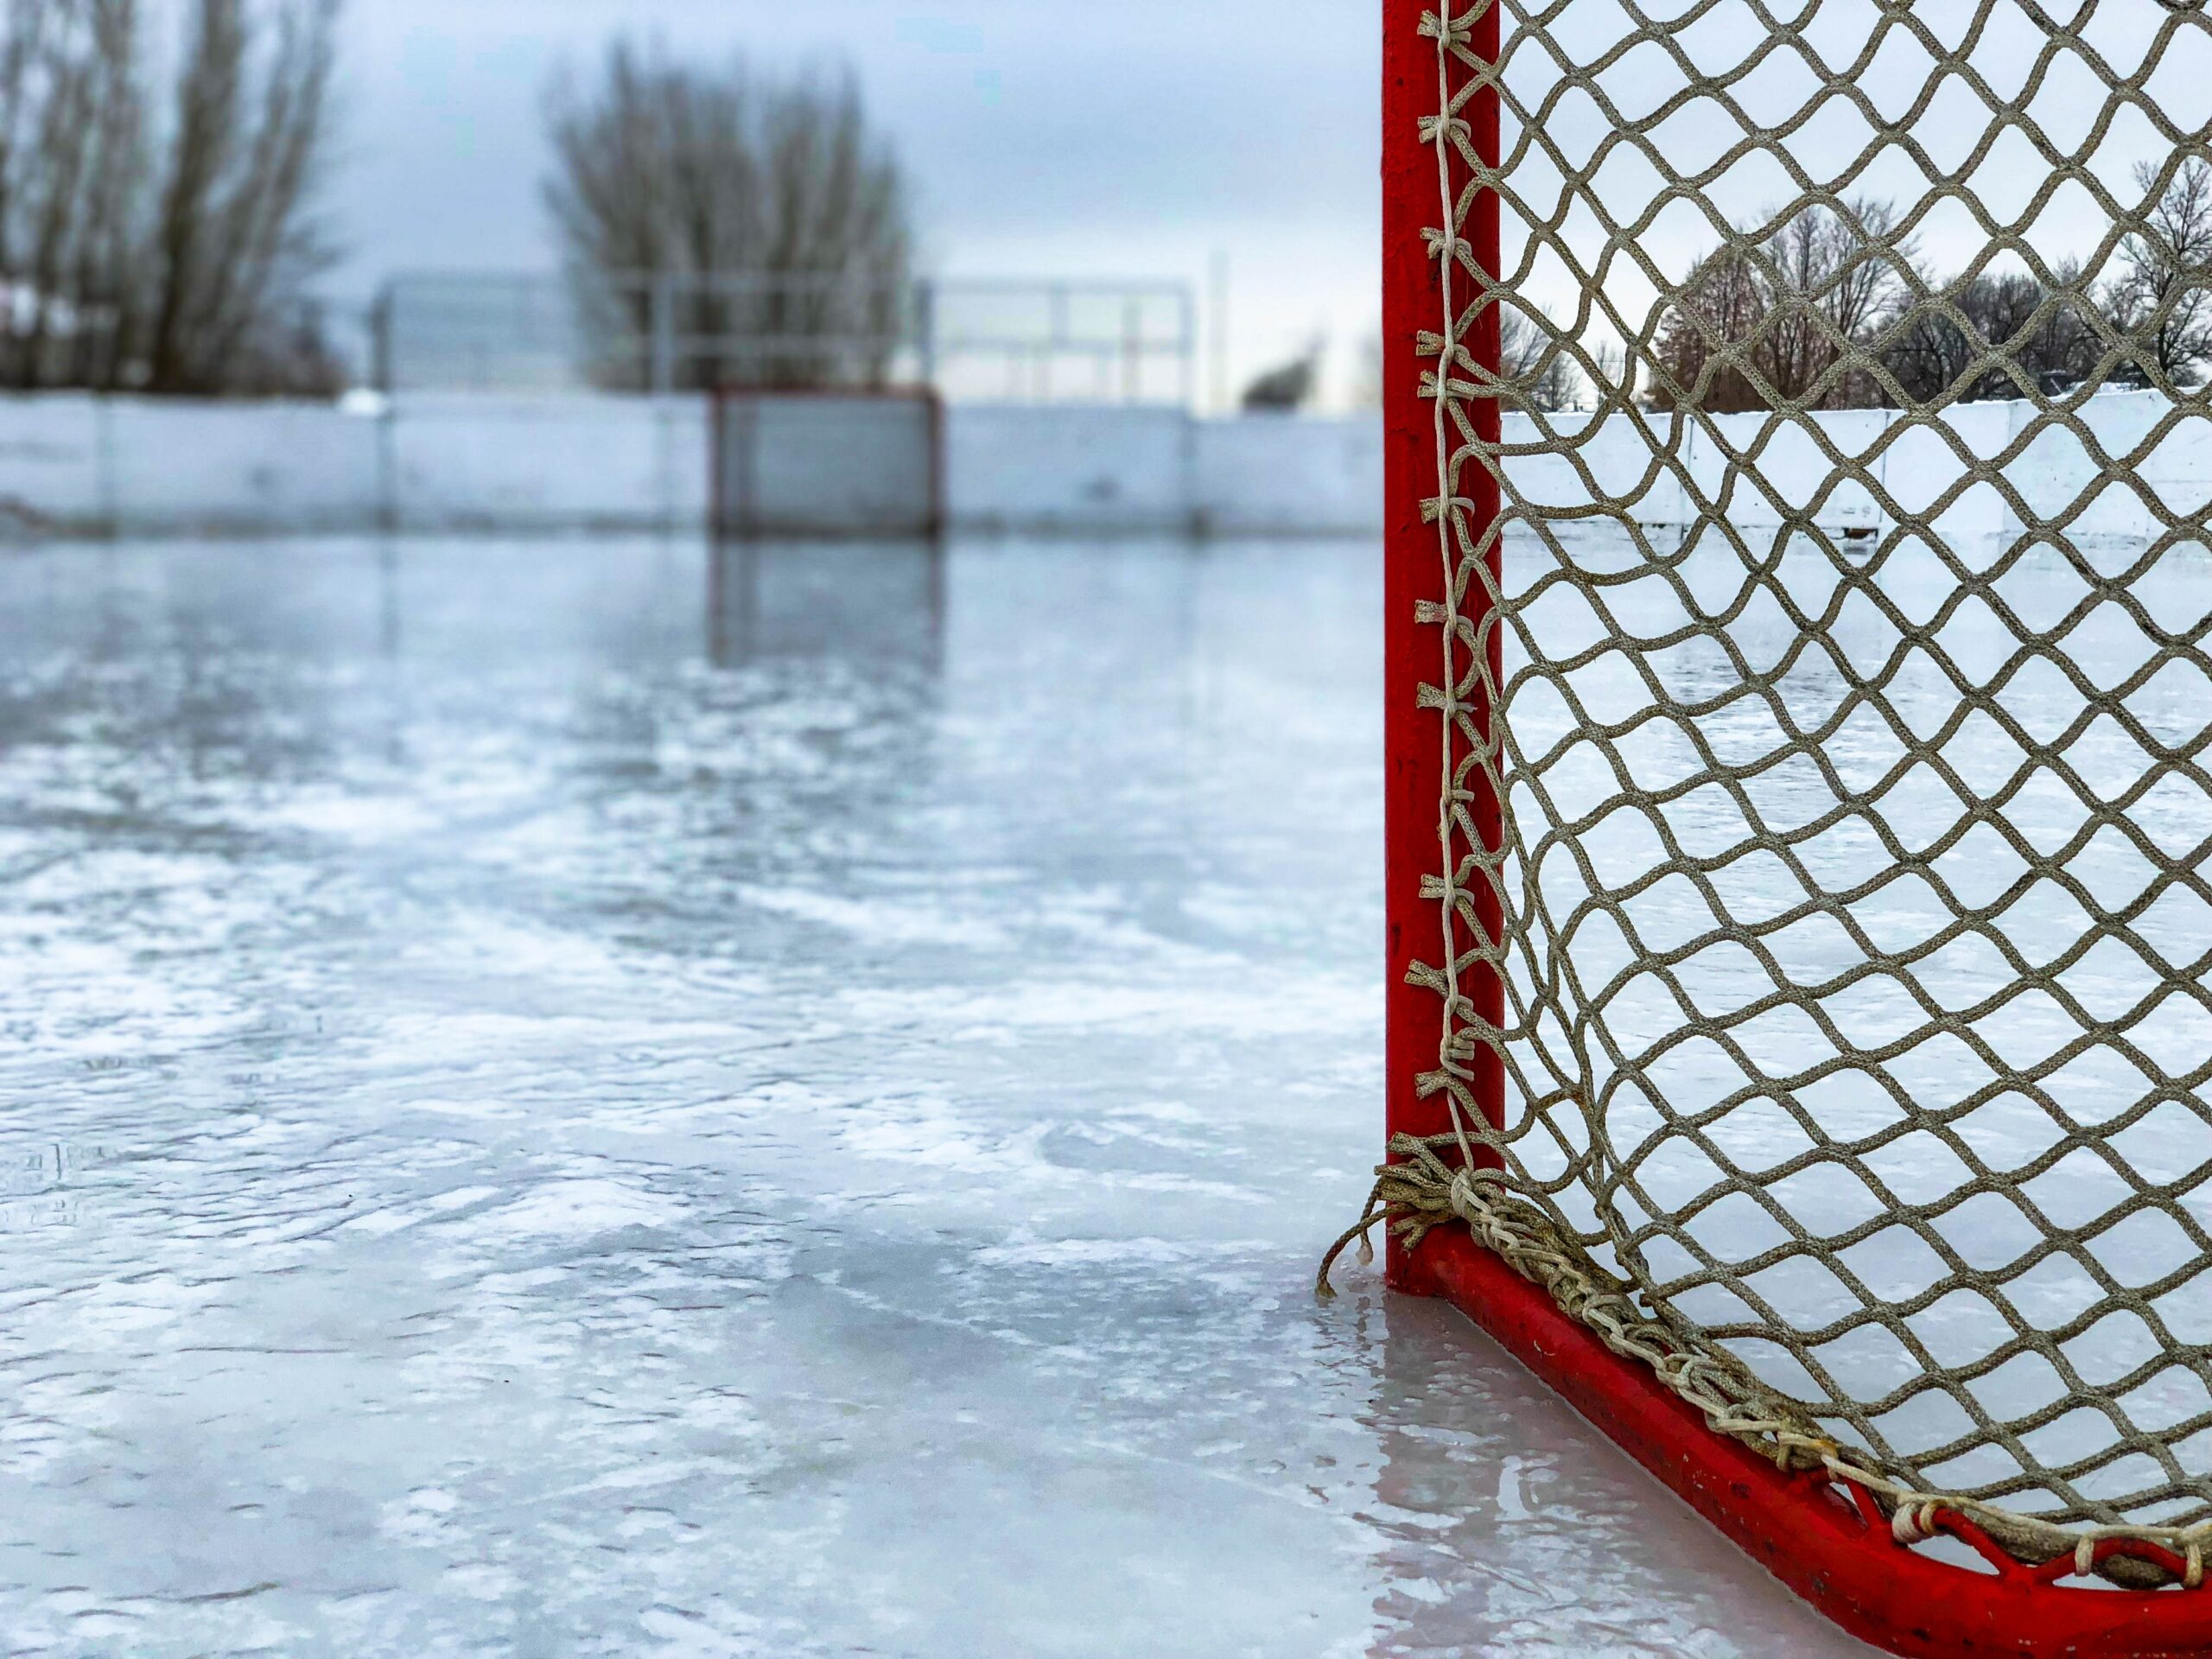 A close up shot of the back of a net on an outdoor hockey rink.